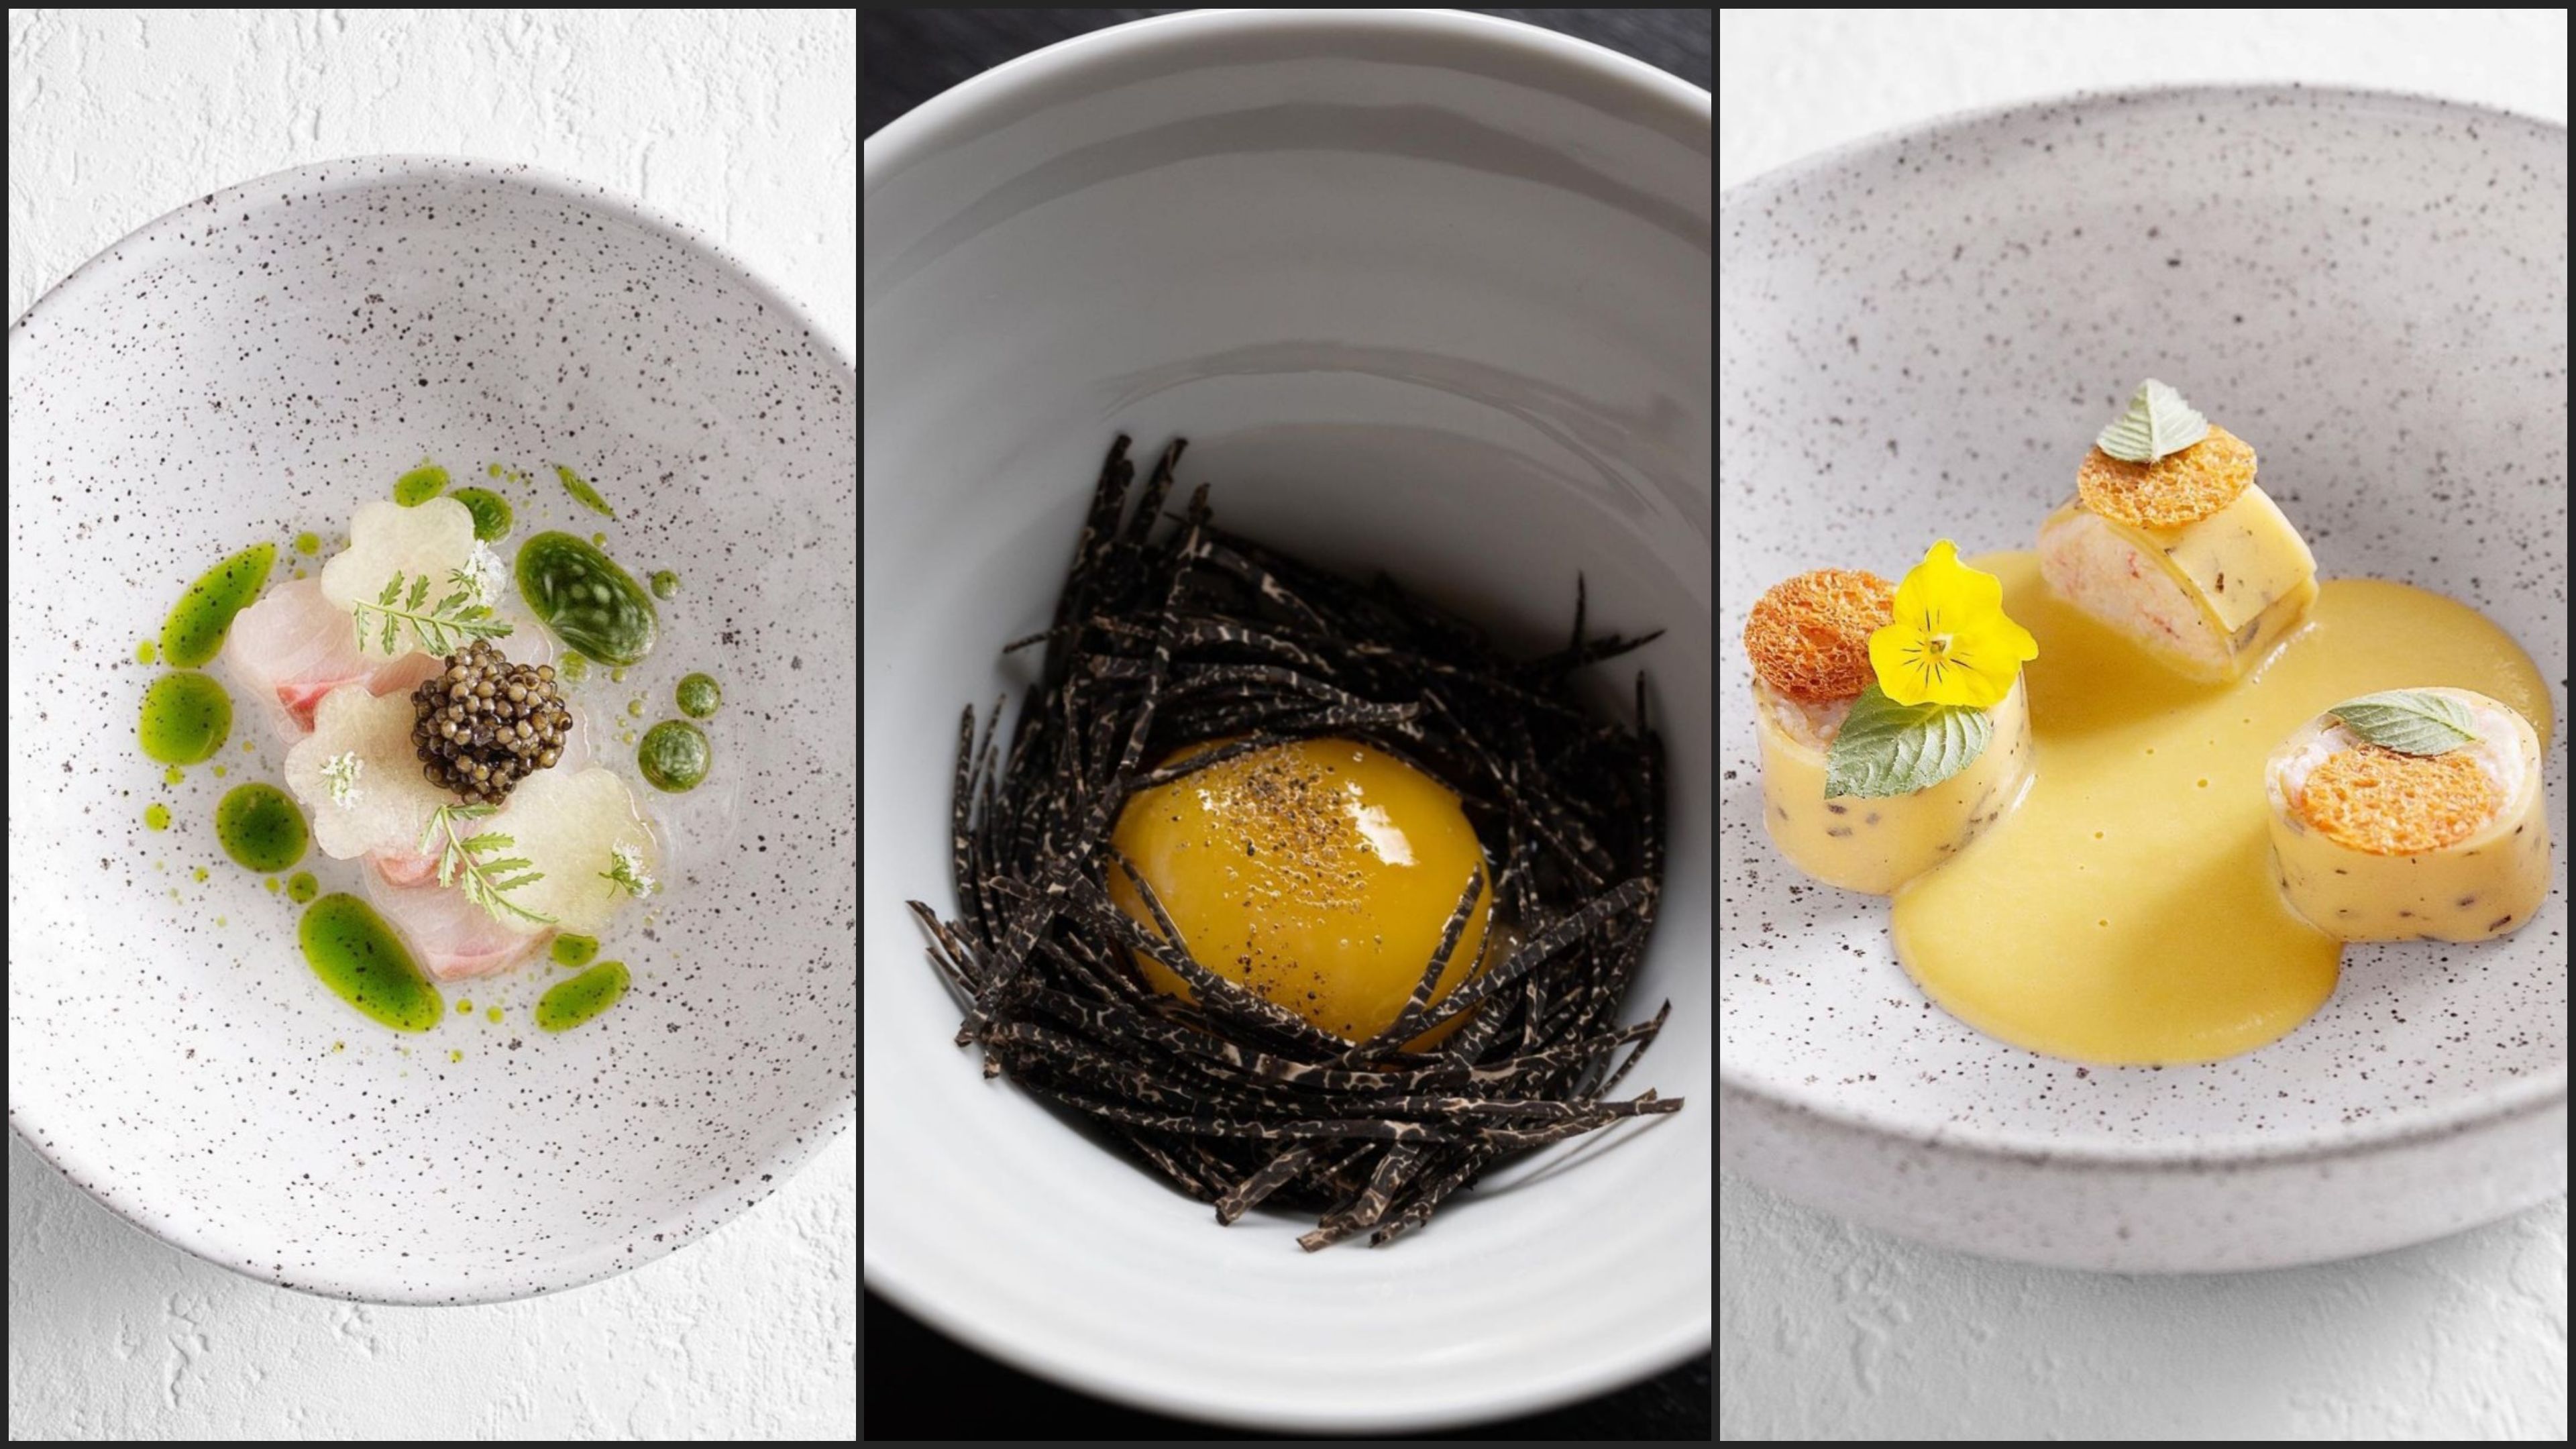 From l to r. Shima Aji Crudo with Melon and Smoked Tomato. Farro Porridge with Perigord Truffle. Peeky Toe Crab Wrapped in Corn and Australian Black Truffle, Red Currant and a Sweet Corn Veloute.